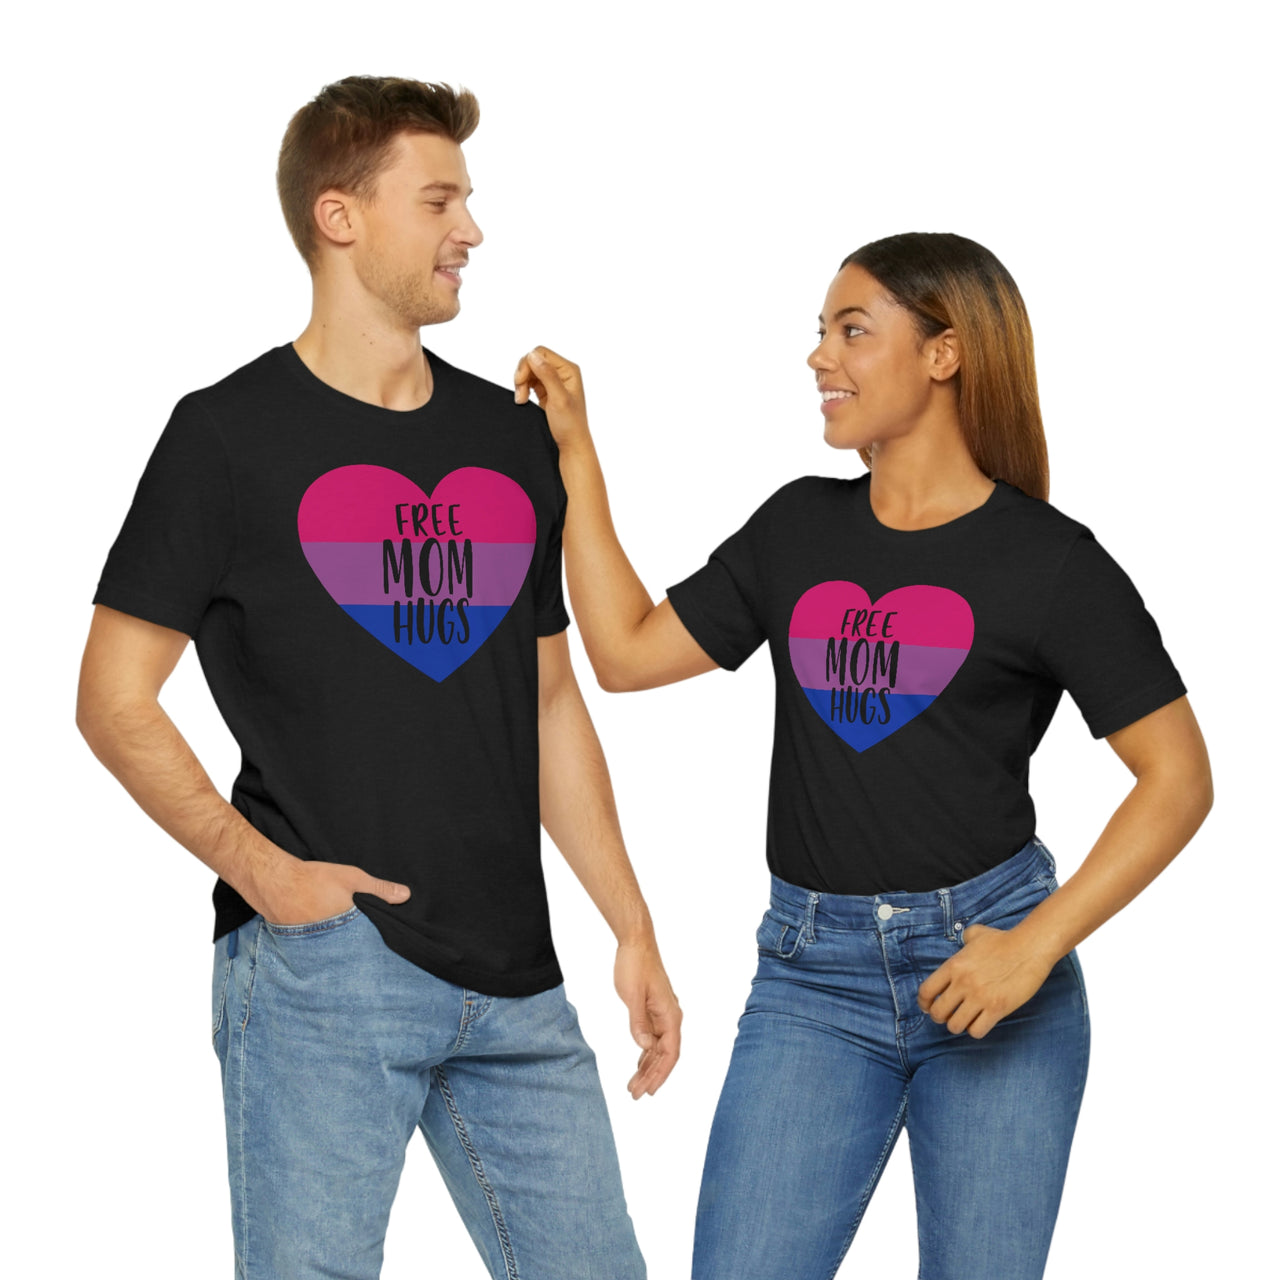 Bisexual Pride Flag Mother's Day Unisex Short Sleeve Tee - Free Mom Hugs SHAVA CO